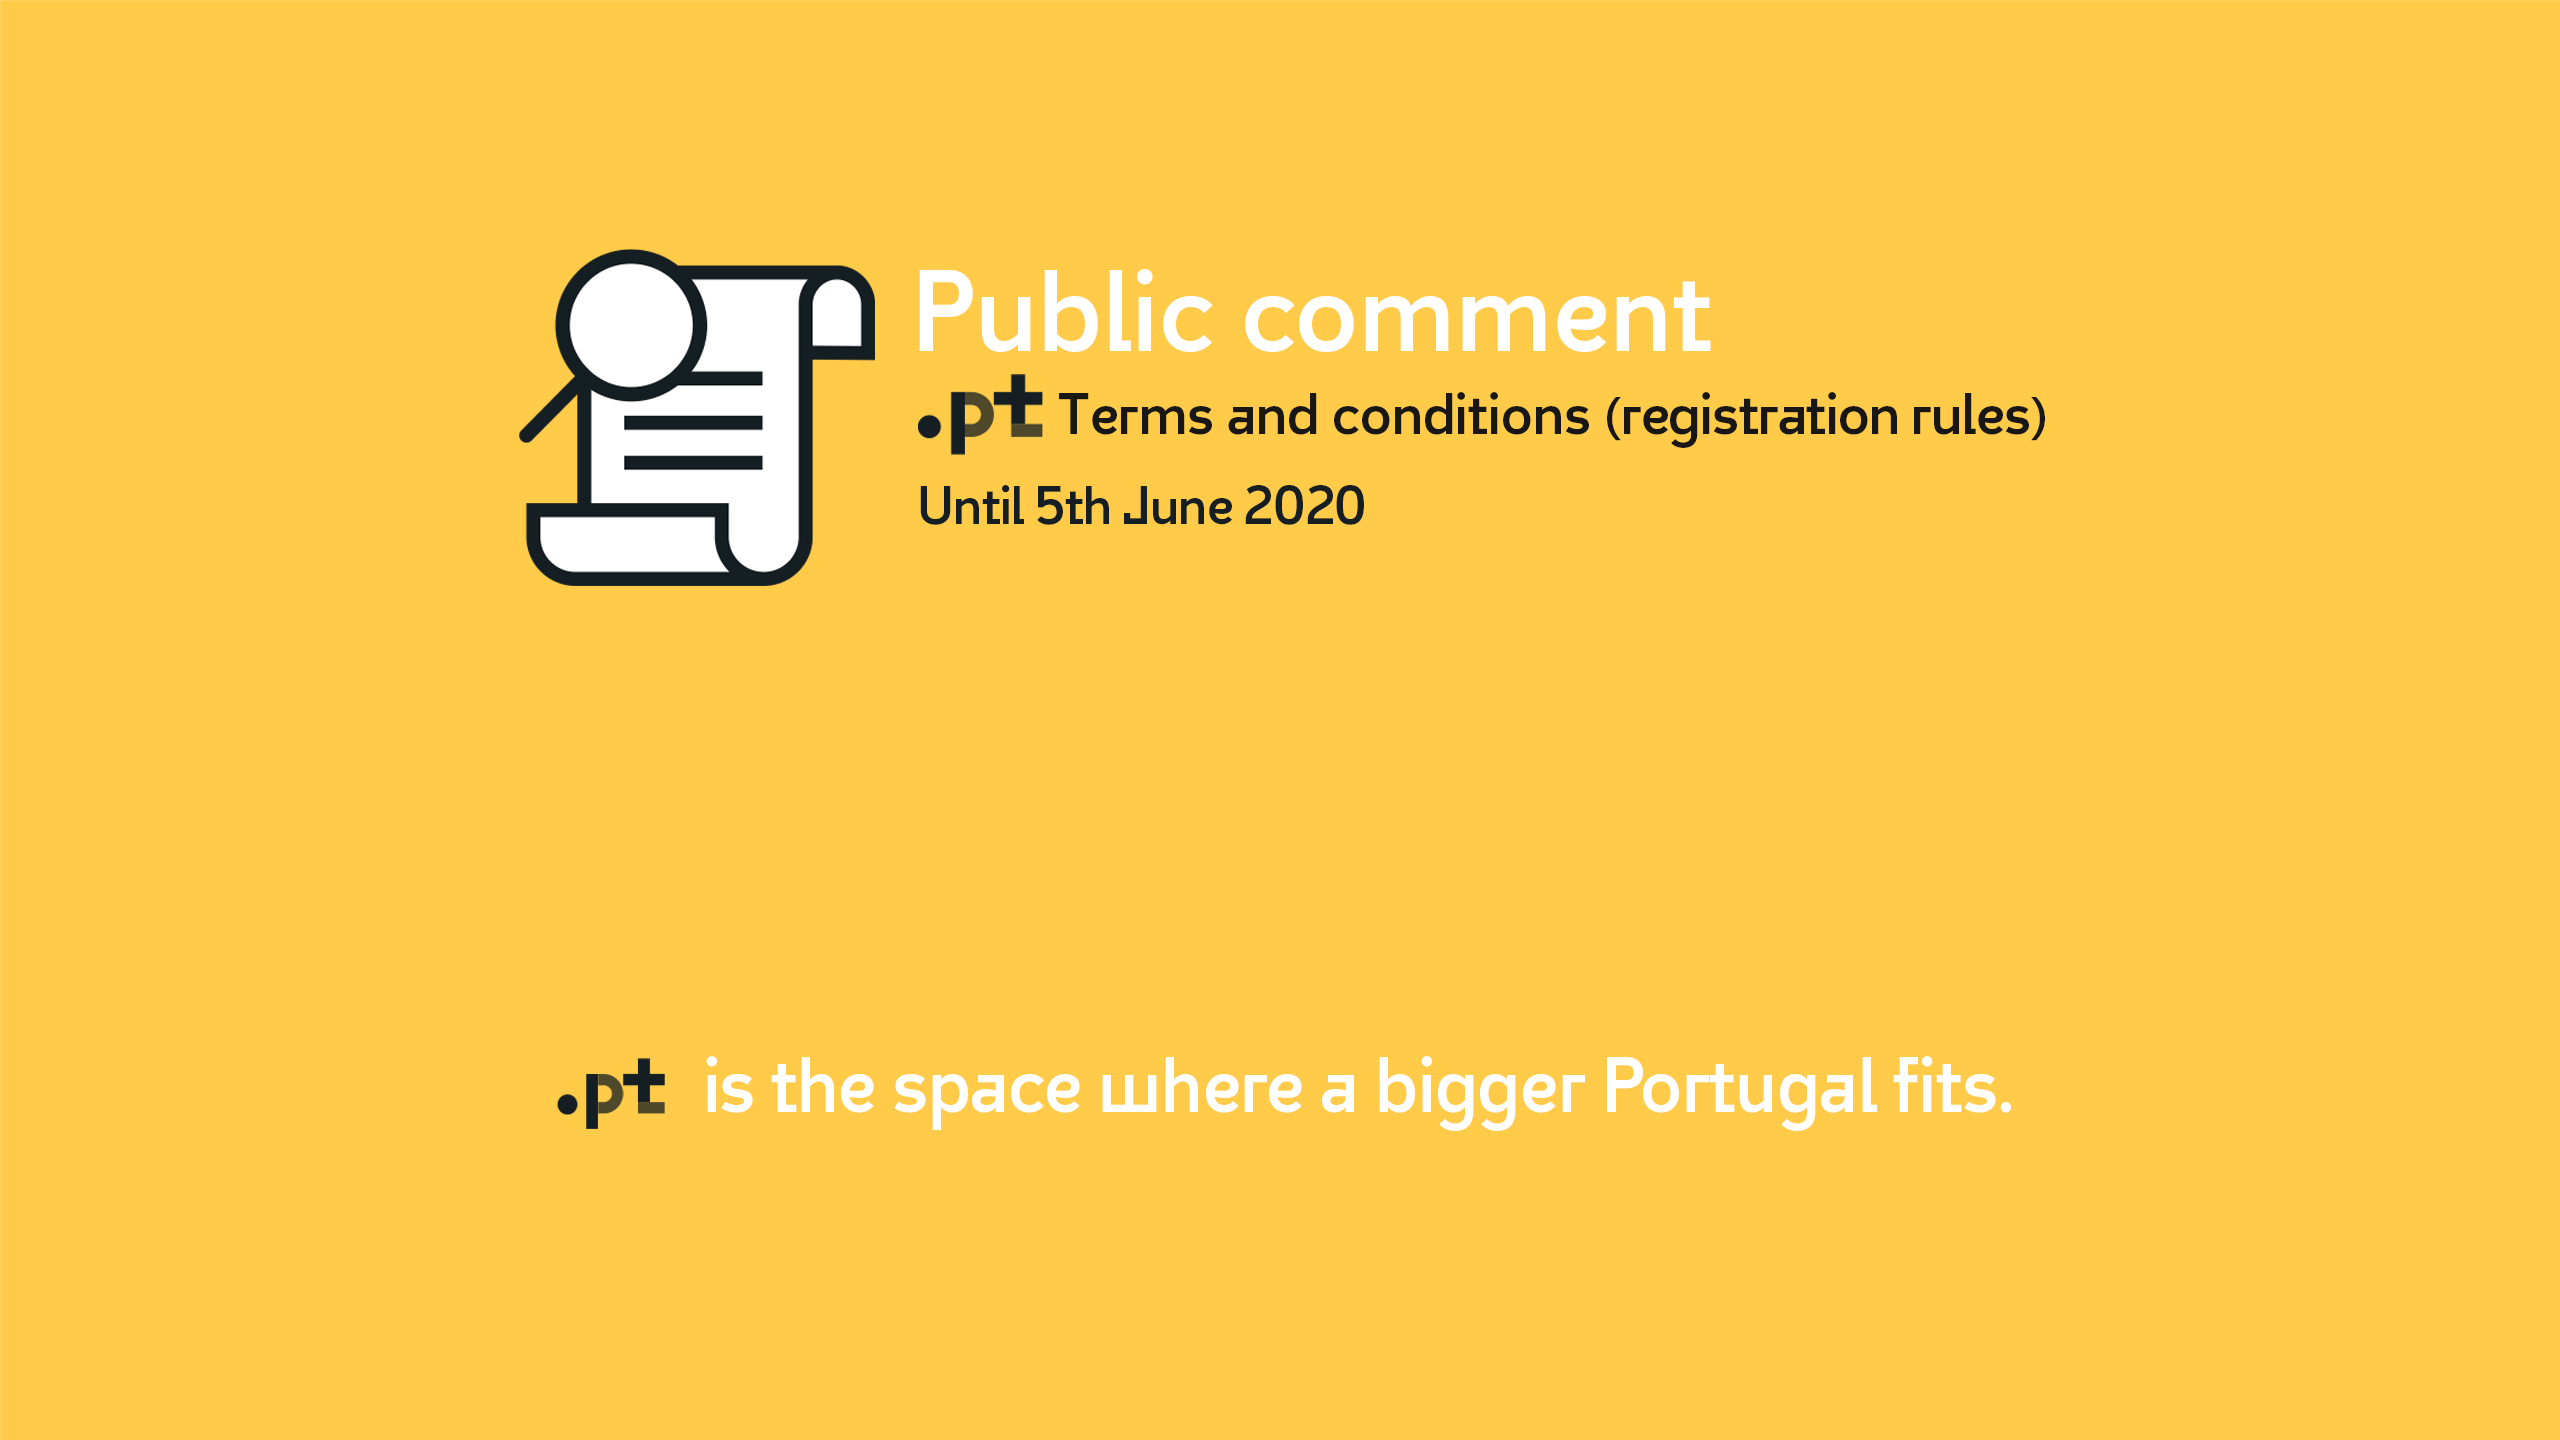 Public comment on the new .pt Terms and Conditions until 5th of June